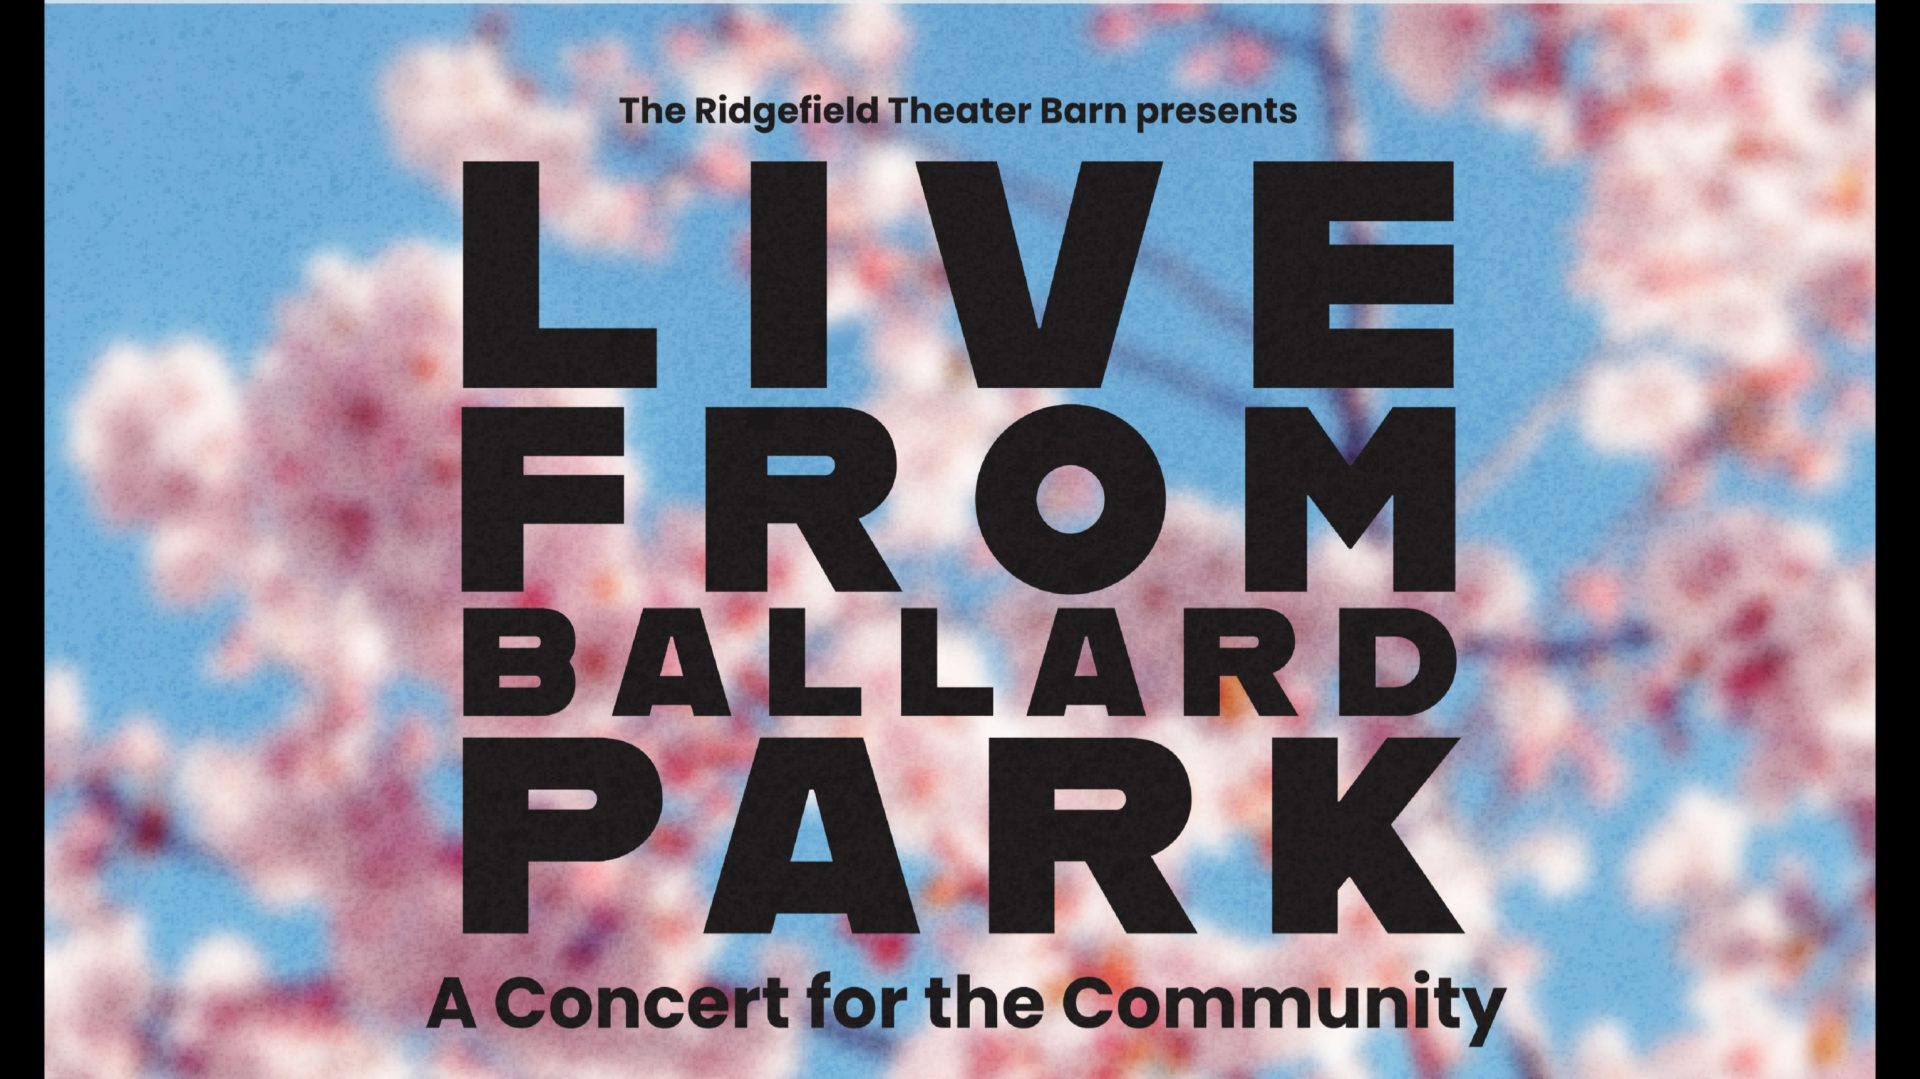 RTB THIRD ANNUAL CONCERT FOR THE COMMUNITY AUGUST 20TH